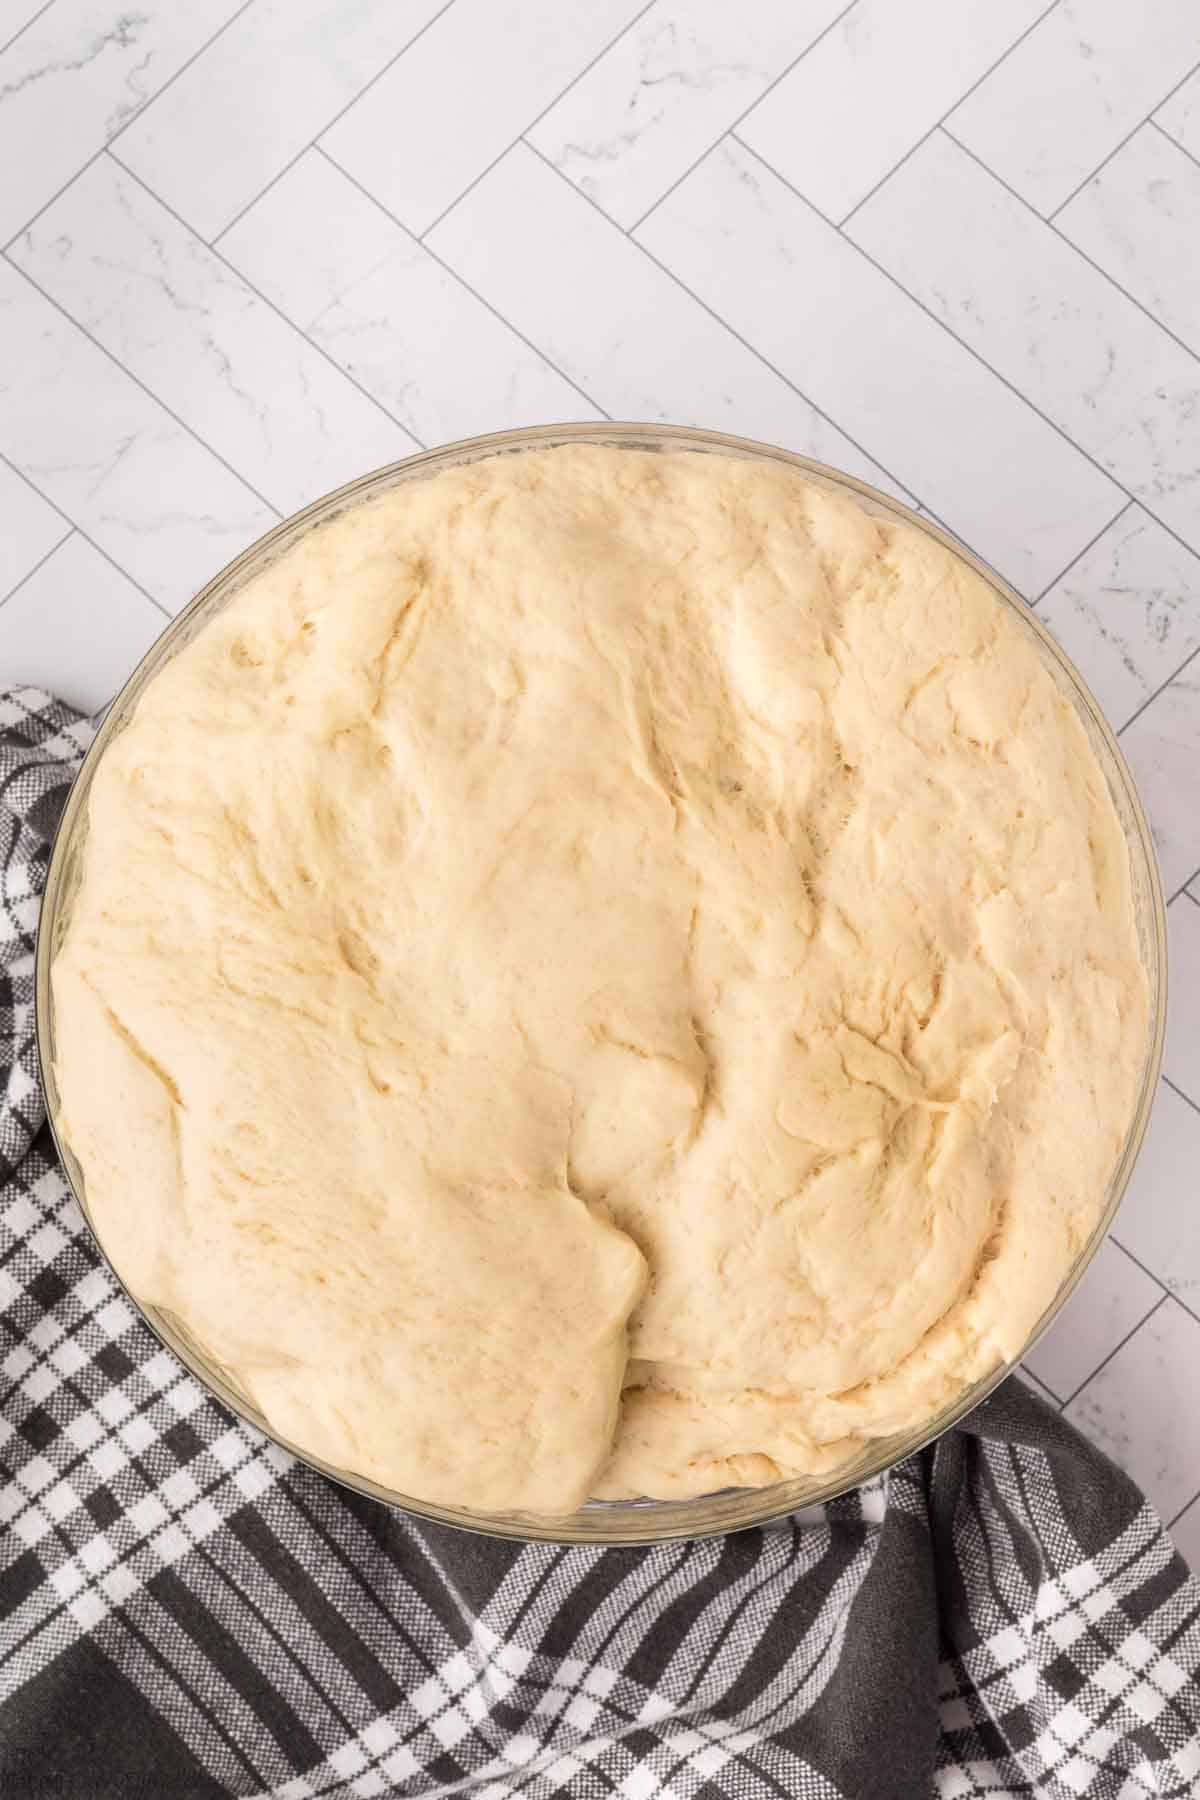 Allowing the dough to double in size in a bowl